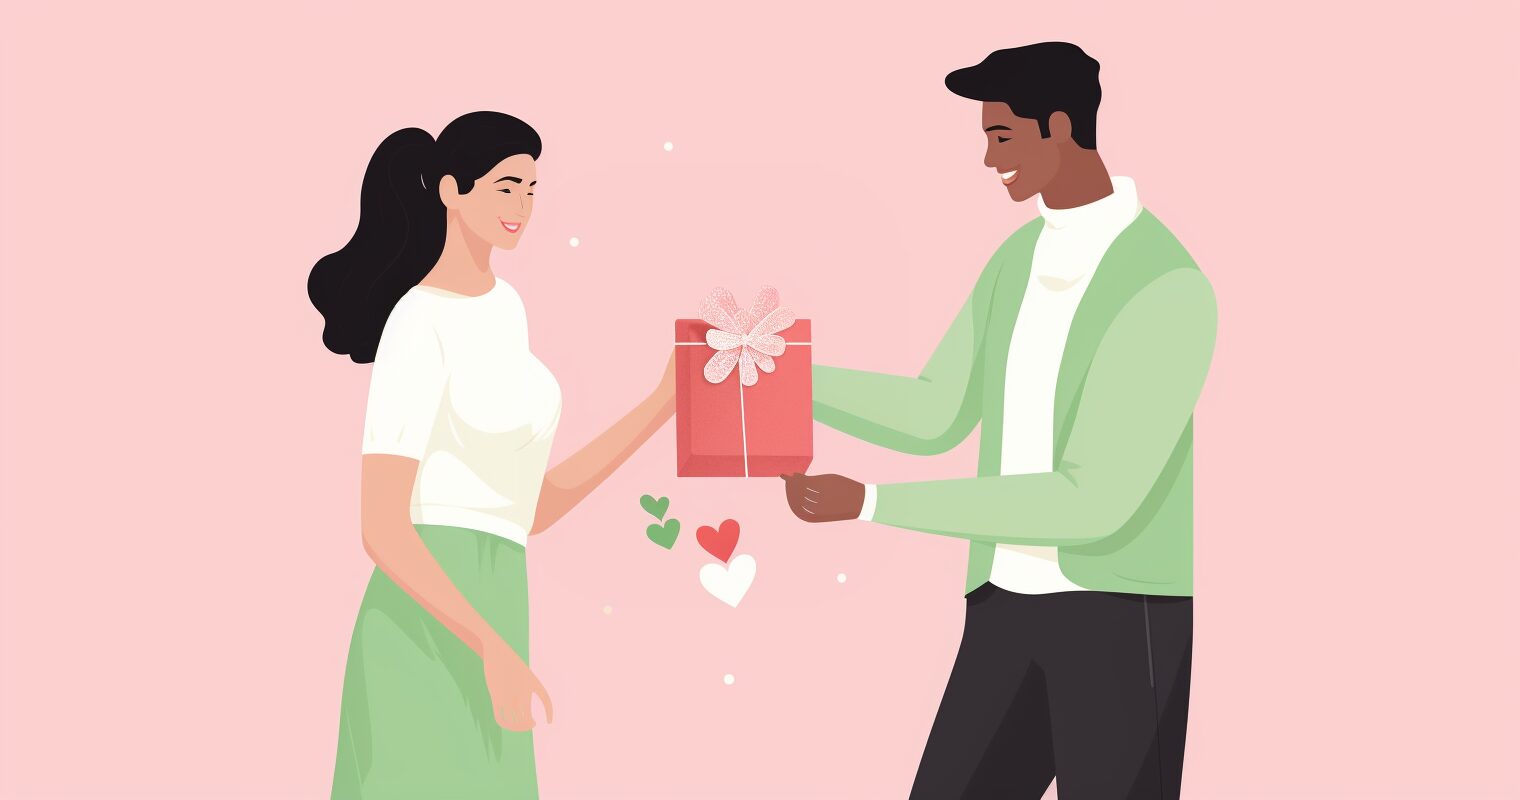 A woman gives a man a Valentine's Day gift.